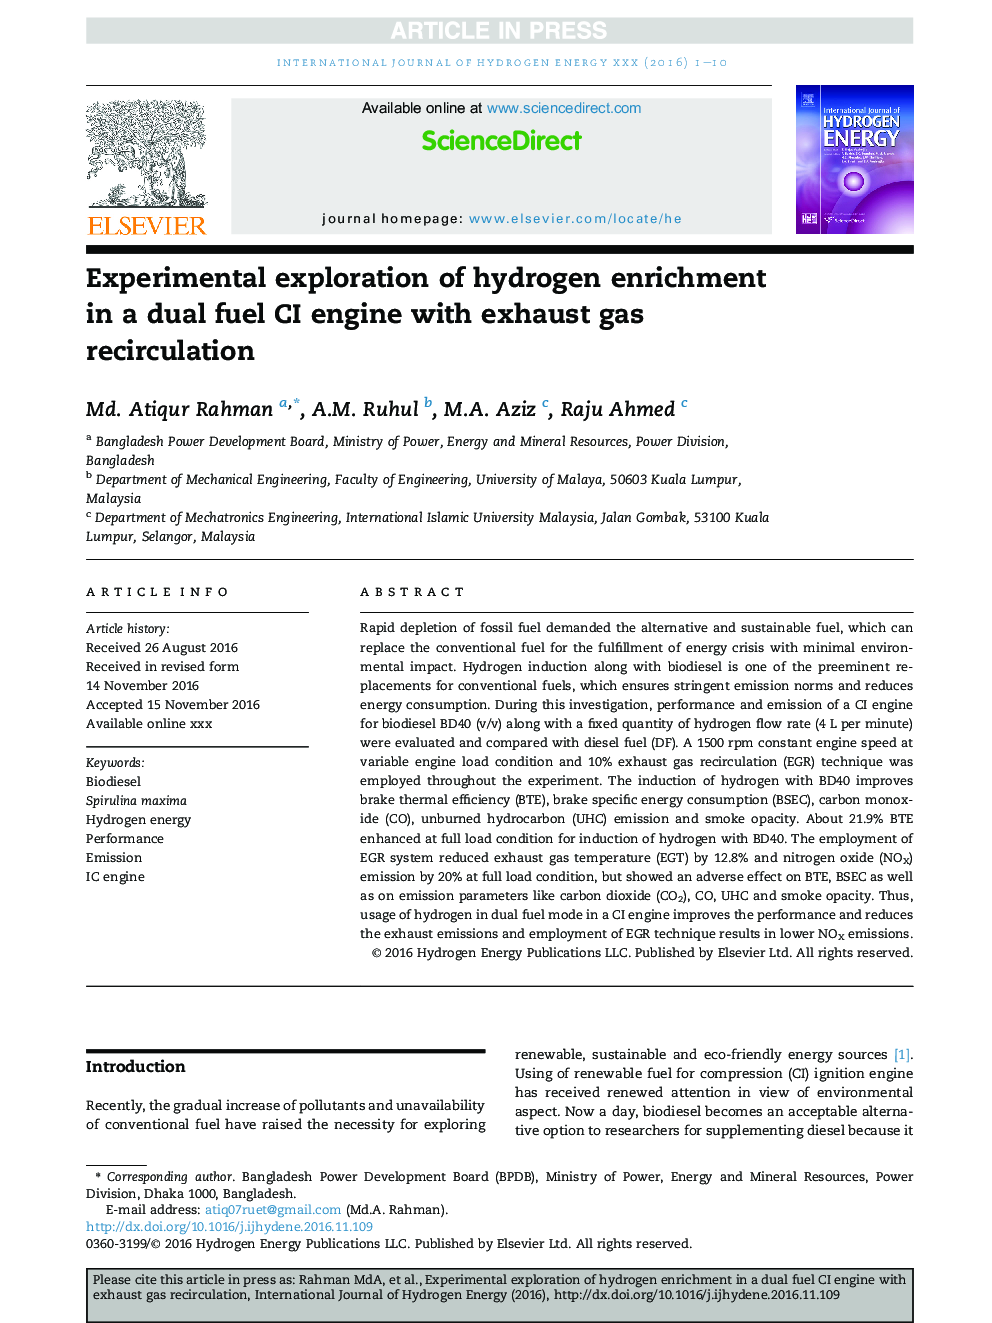 Experimental exploration of hydrogen enrichment in a dual fuel CI engine with exhaust gas recirculation